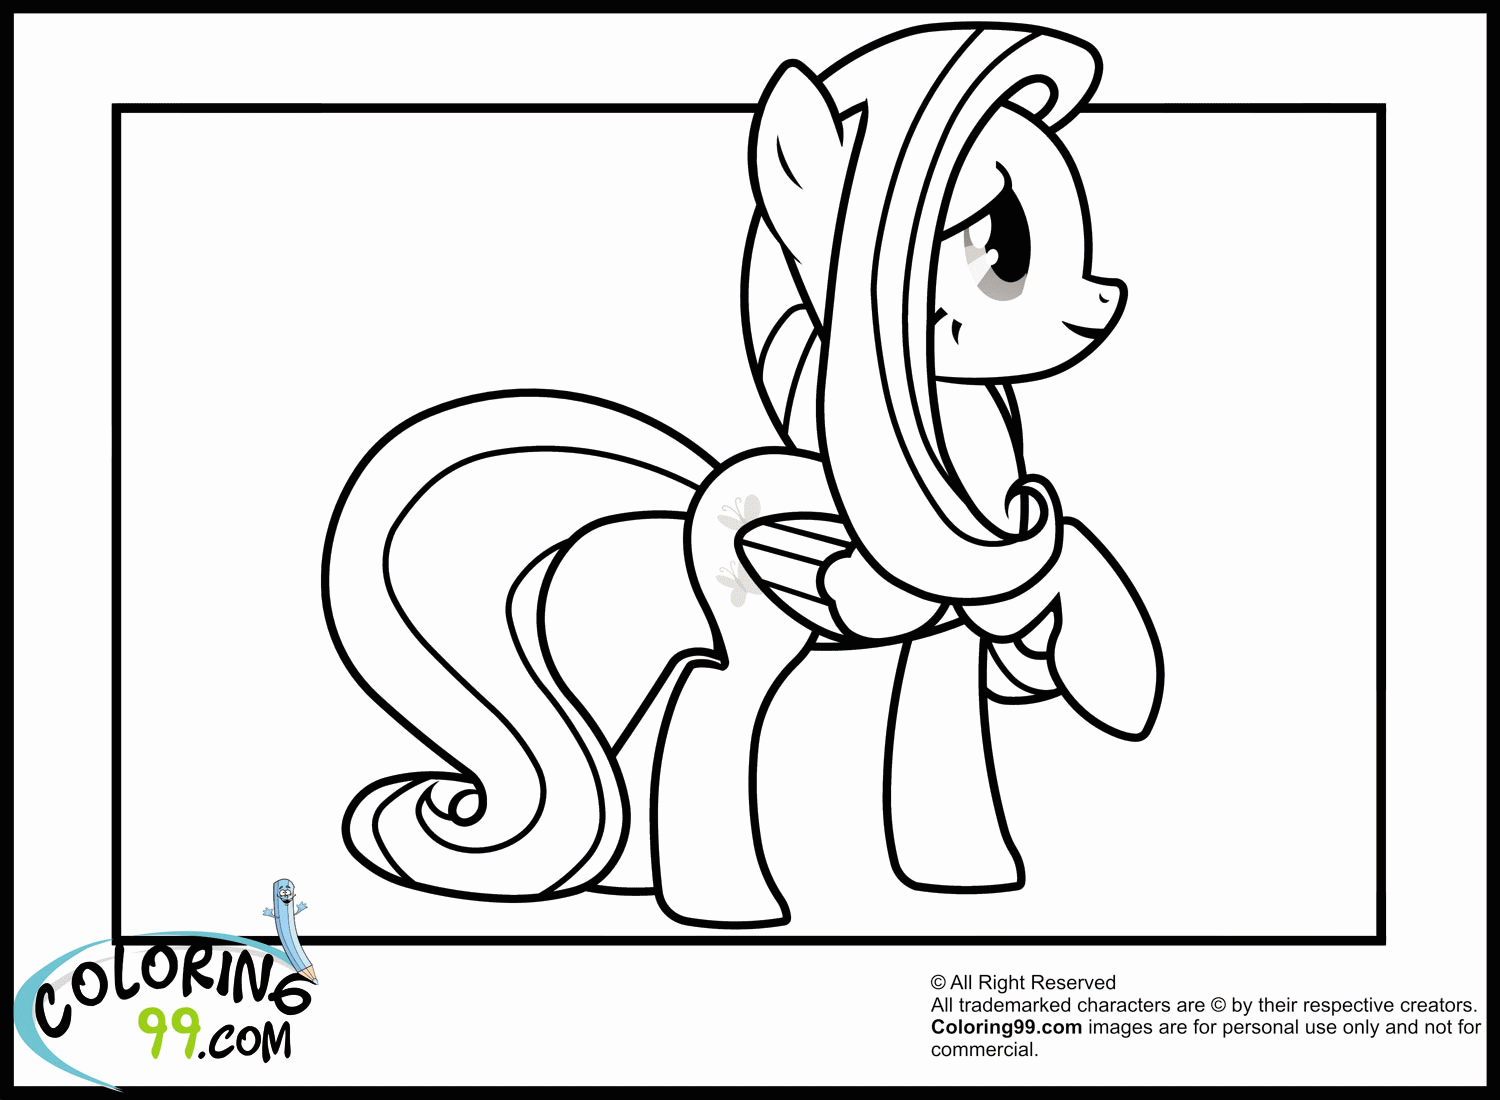 6 Best Images of Free Printable Coloring Pages Fluttershy - My ...